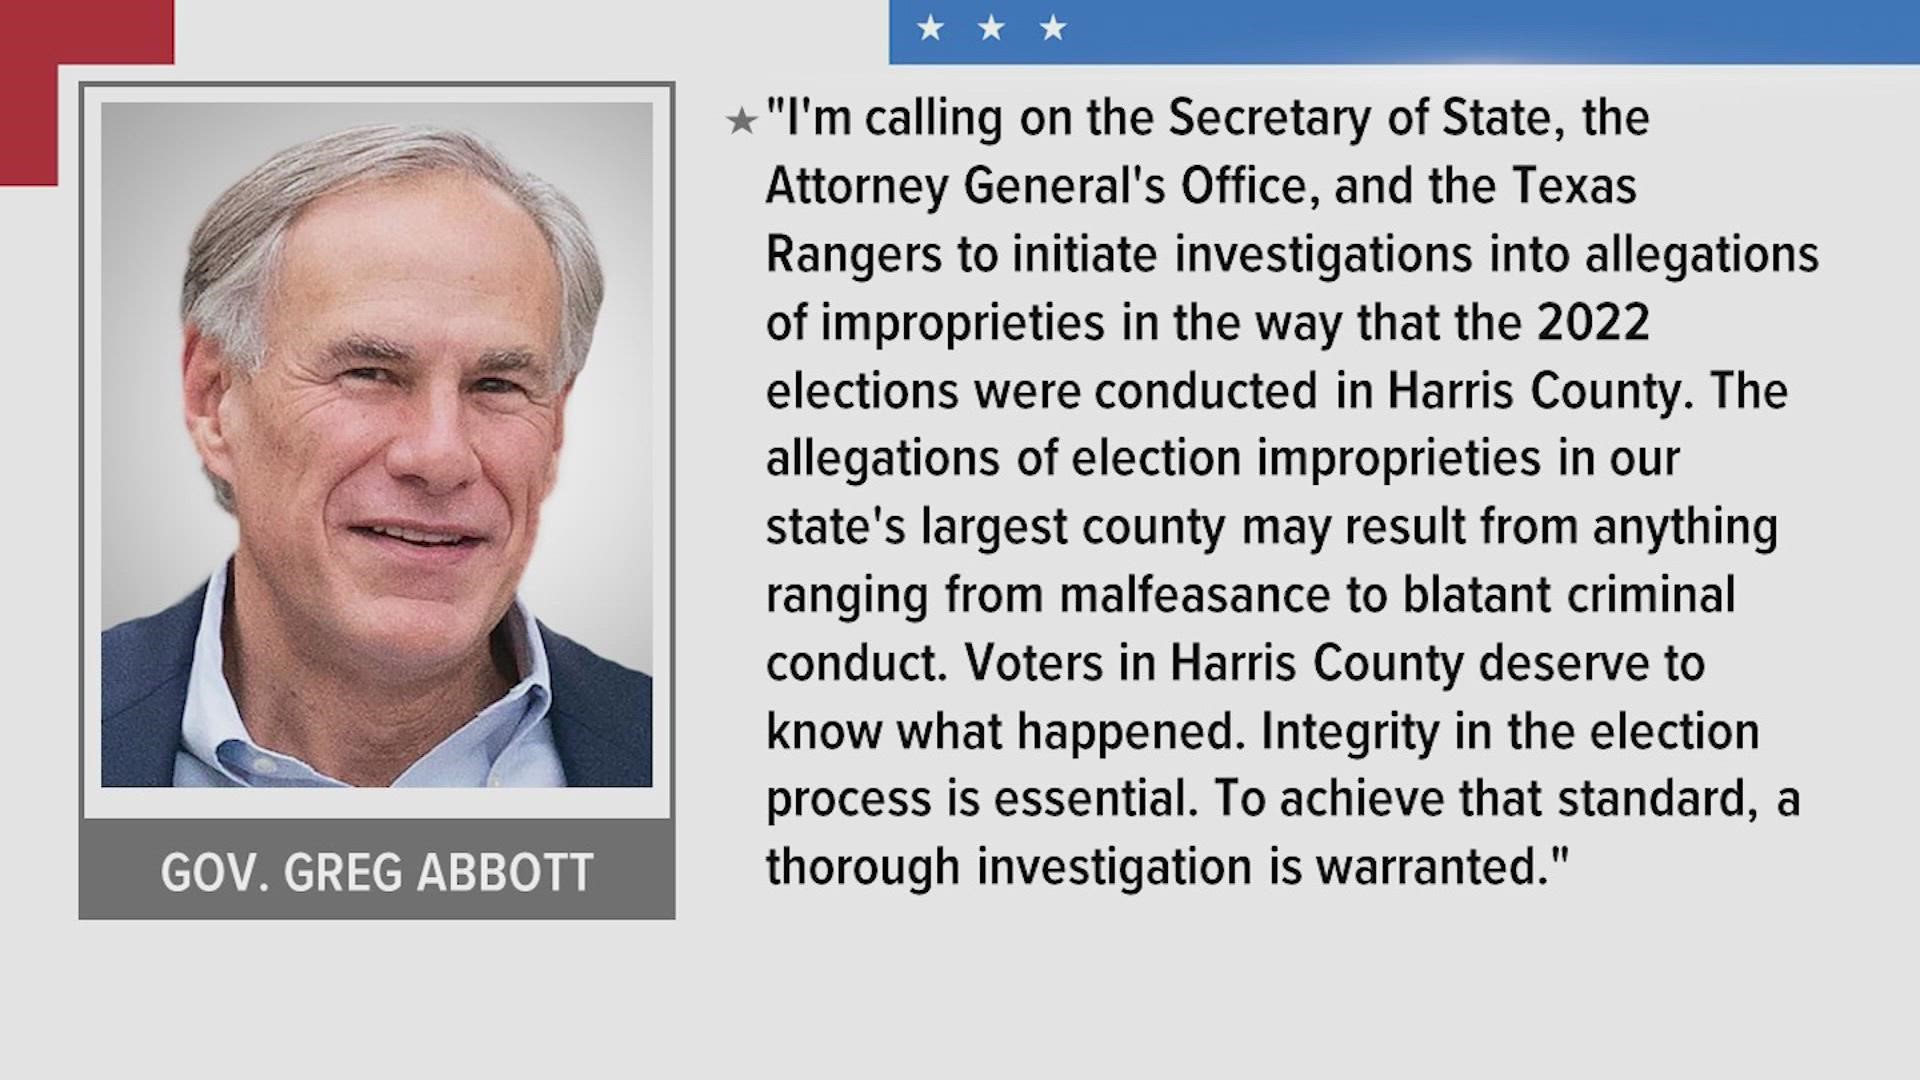 Abbott's office said voters in Harris County were frustrated by confusion and delays including missing keys and insufficient paper ballots in Republican precincts.